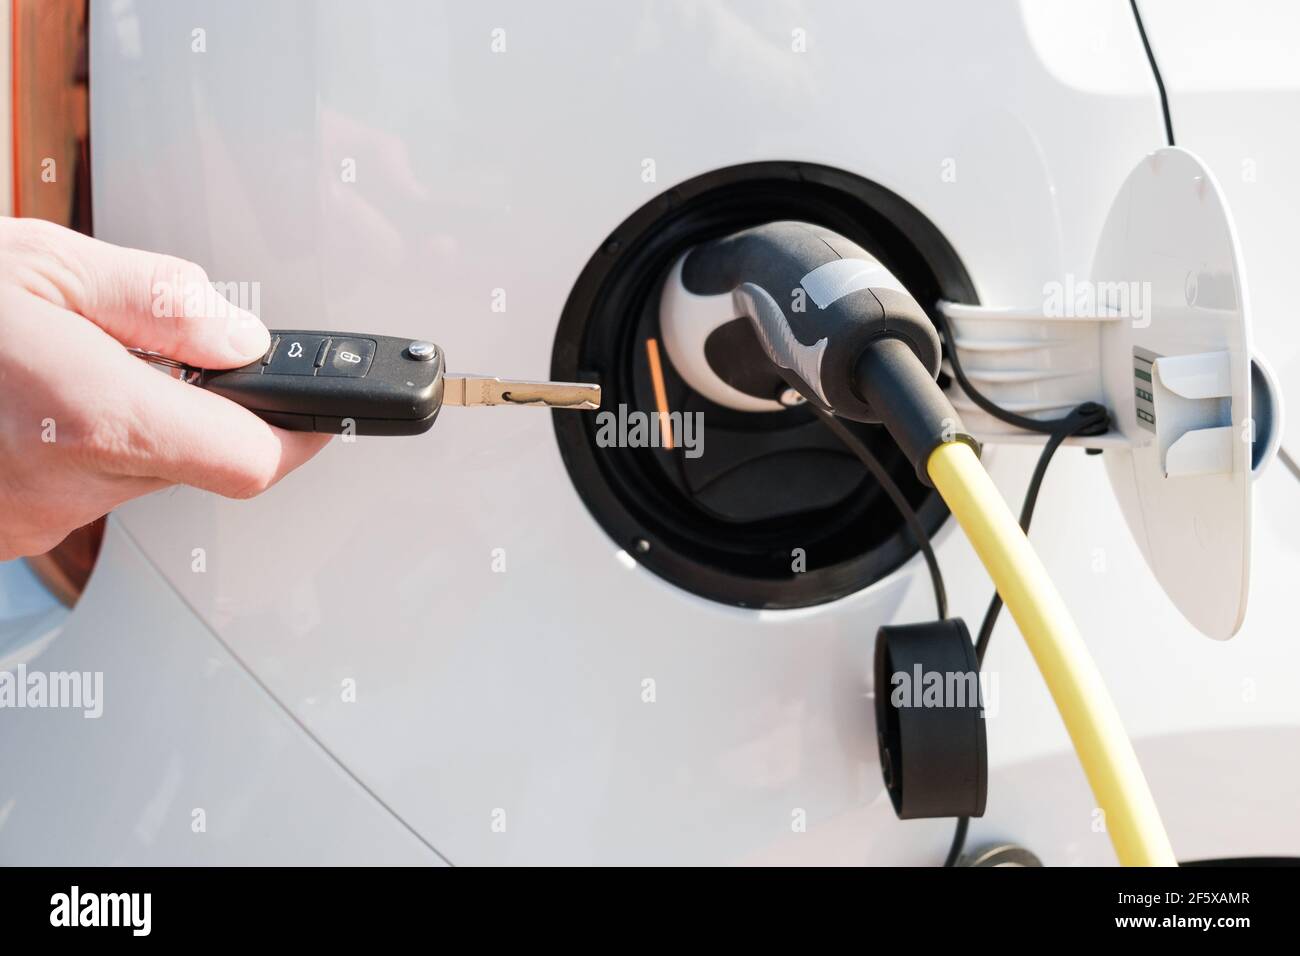 Charging an electric vehicle with a power cable supply plugged in and mans hand unblocking it with a key Stock Photo